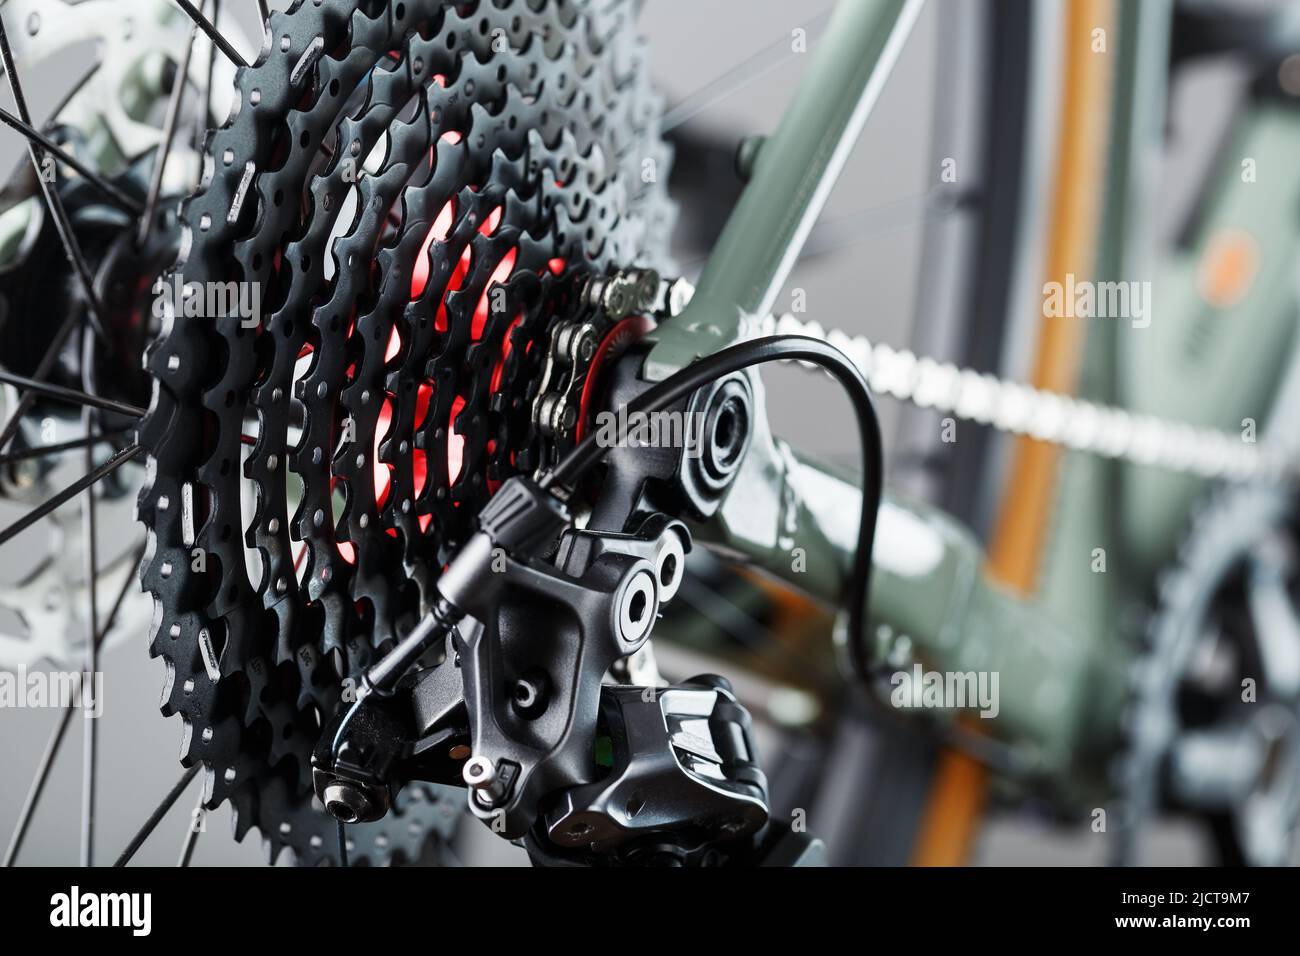 Rear bicycle cassette speeds with a wide range and chain close-up, accessories for repair and tuning of the bike Stock Photo